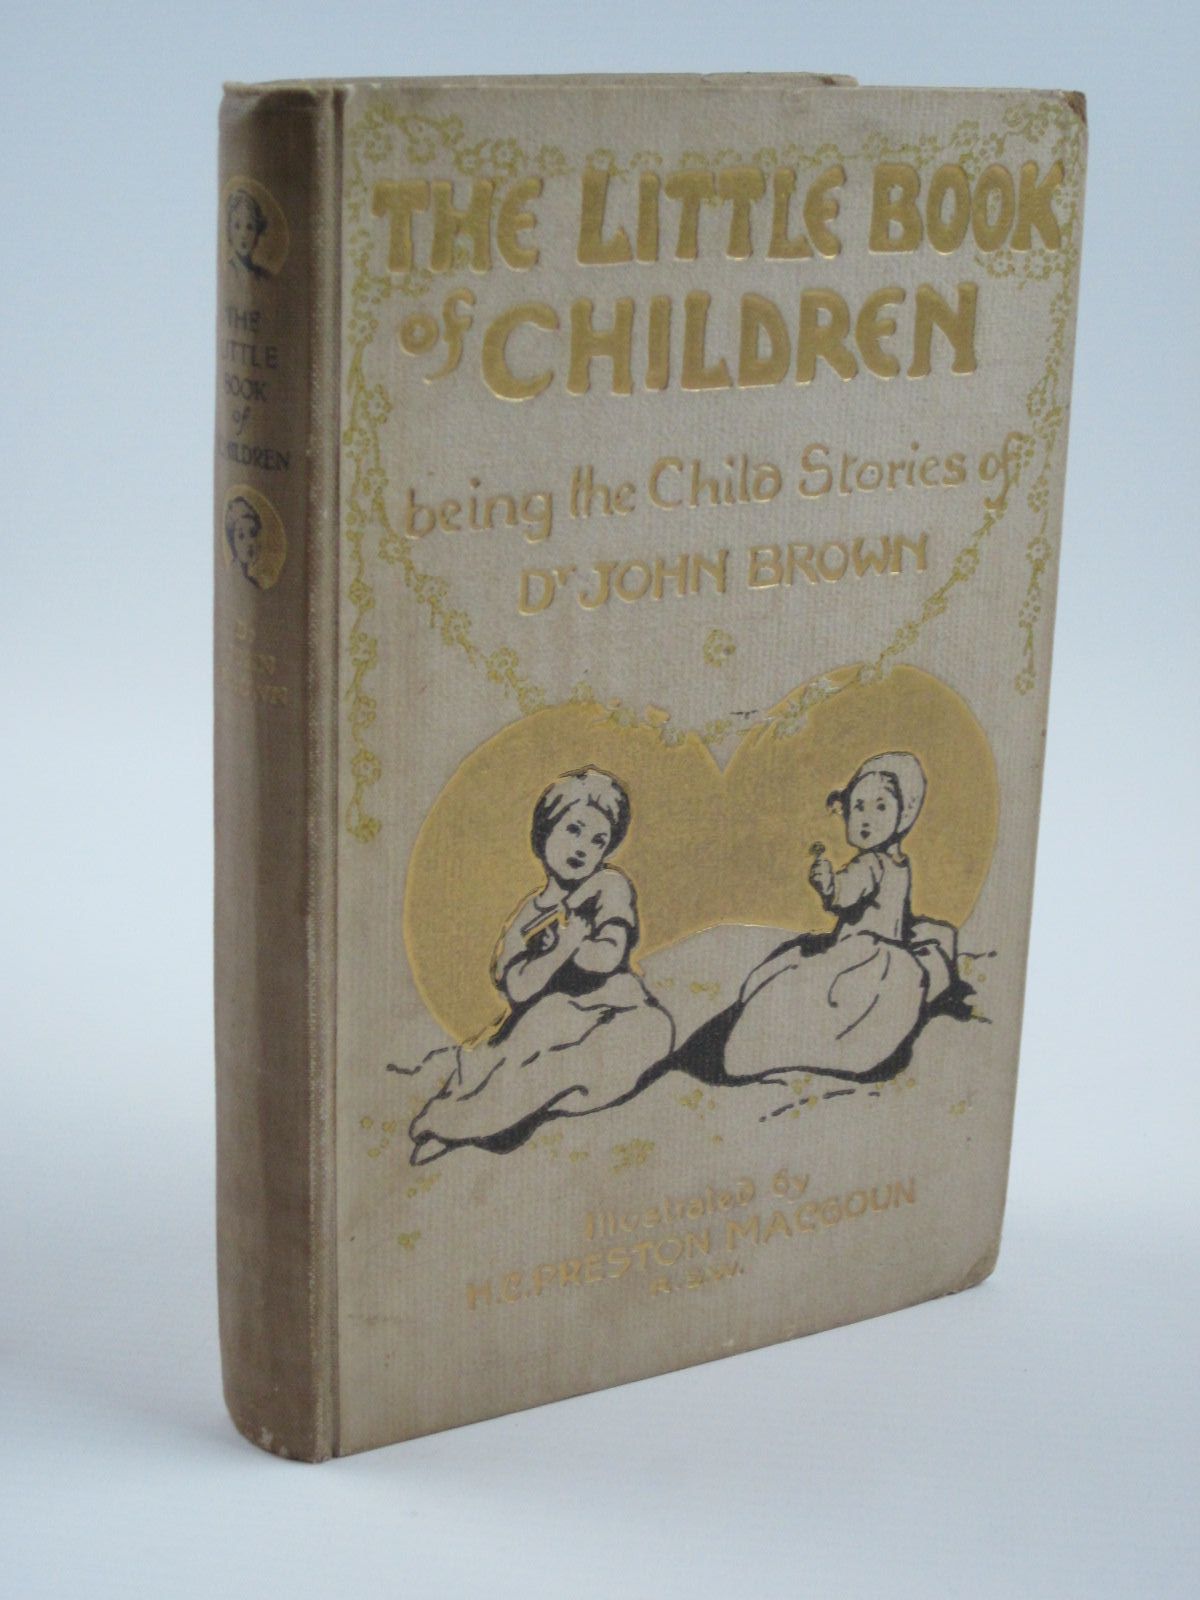 Photo of THE LITTLE BOOK OF CHILDREN written by Brown, John illustrated by MacGoun, H.C. Preston published by T.N. Foulis (STOCK CODE: 1310065)  for sale by Stella & Rose's Books